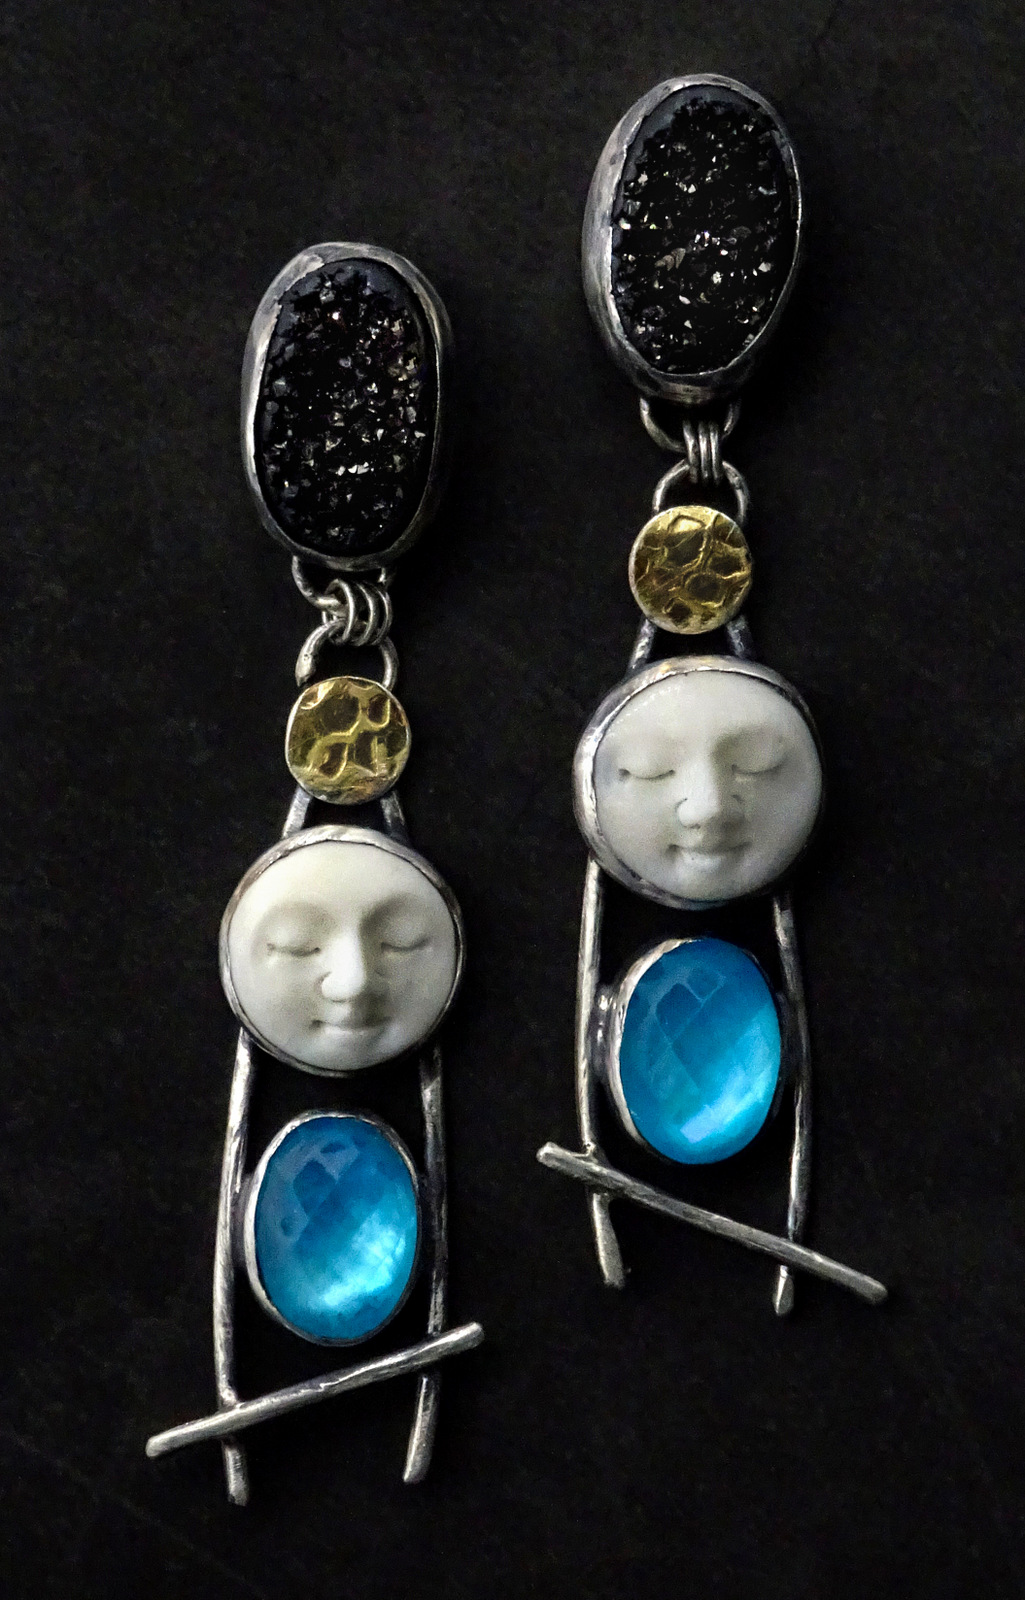 01-Sylvia McCollum, Handcrafted Faces of Courage, Fine Art Silver Jewelry-007.JPG